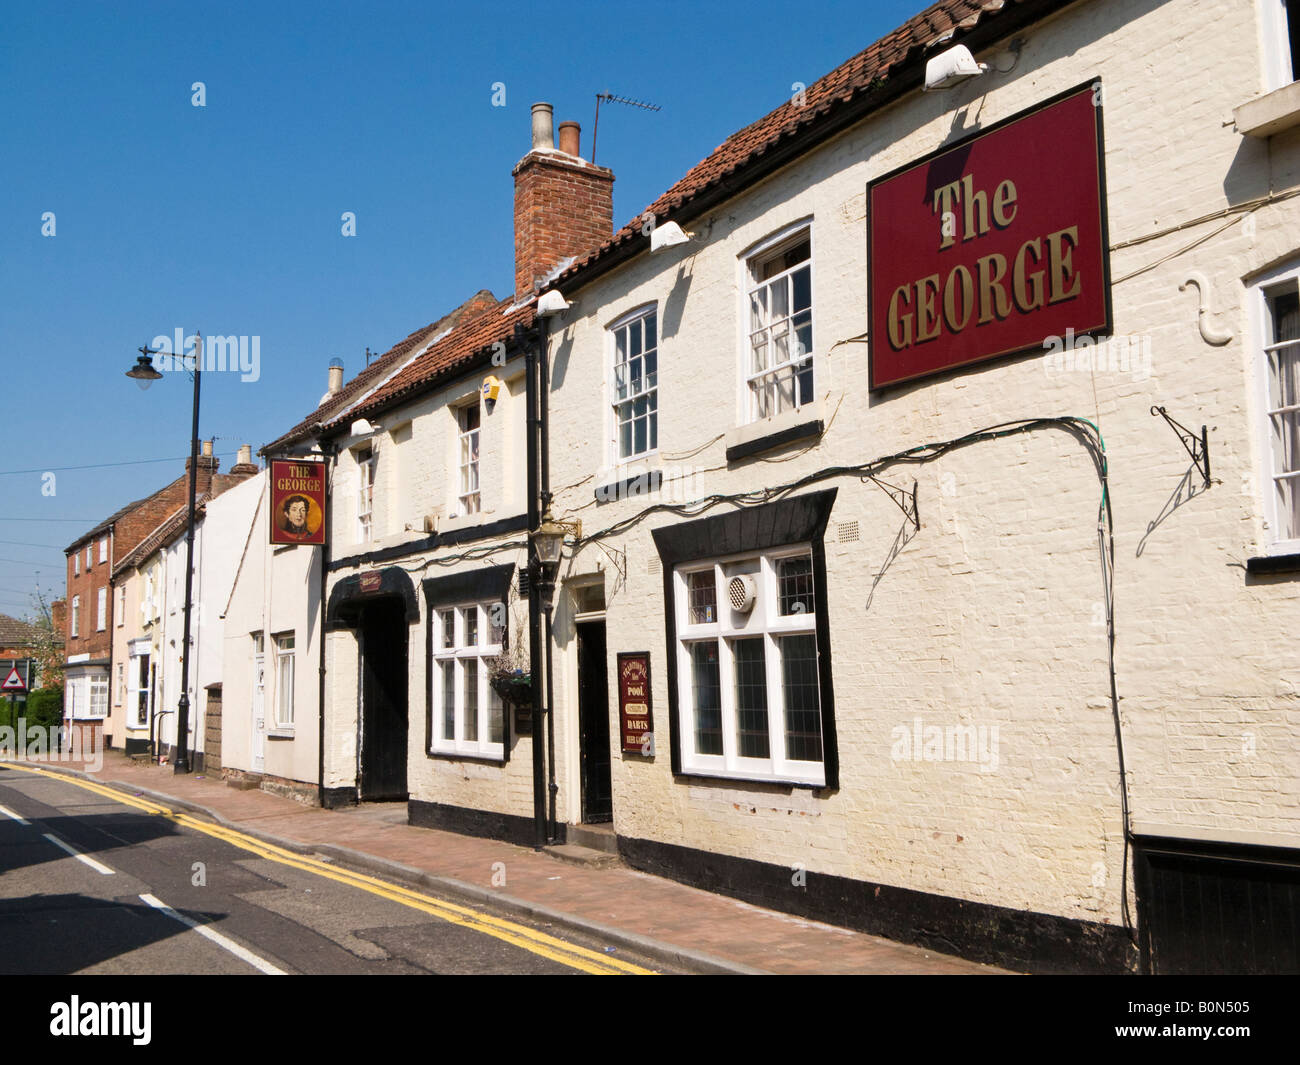 The George a typical british Pub at Market Rasen, Lincolnshire UK Stock Photo